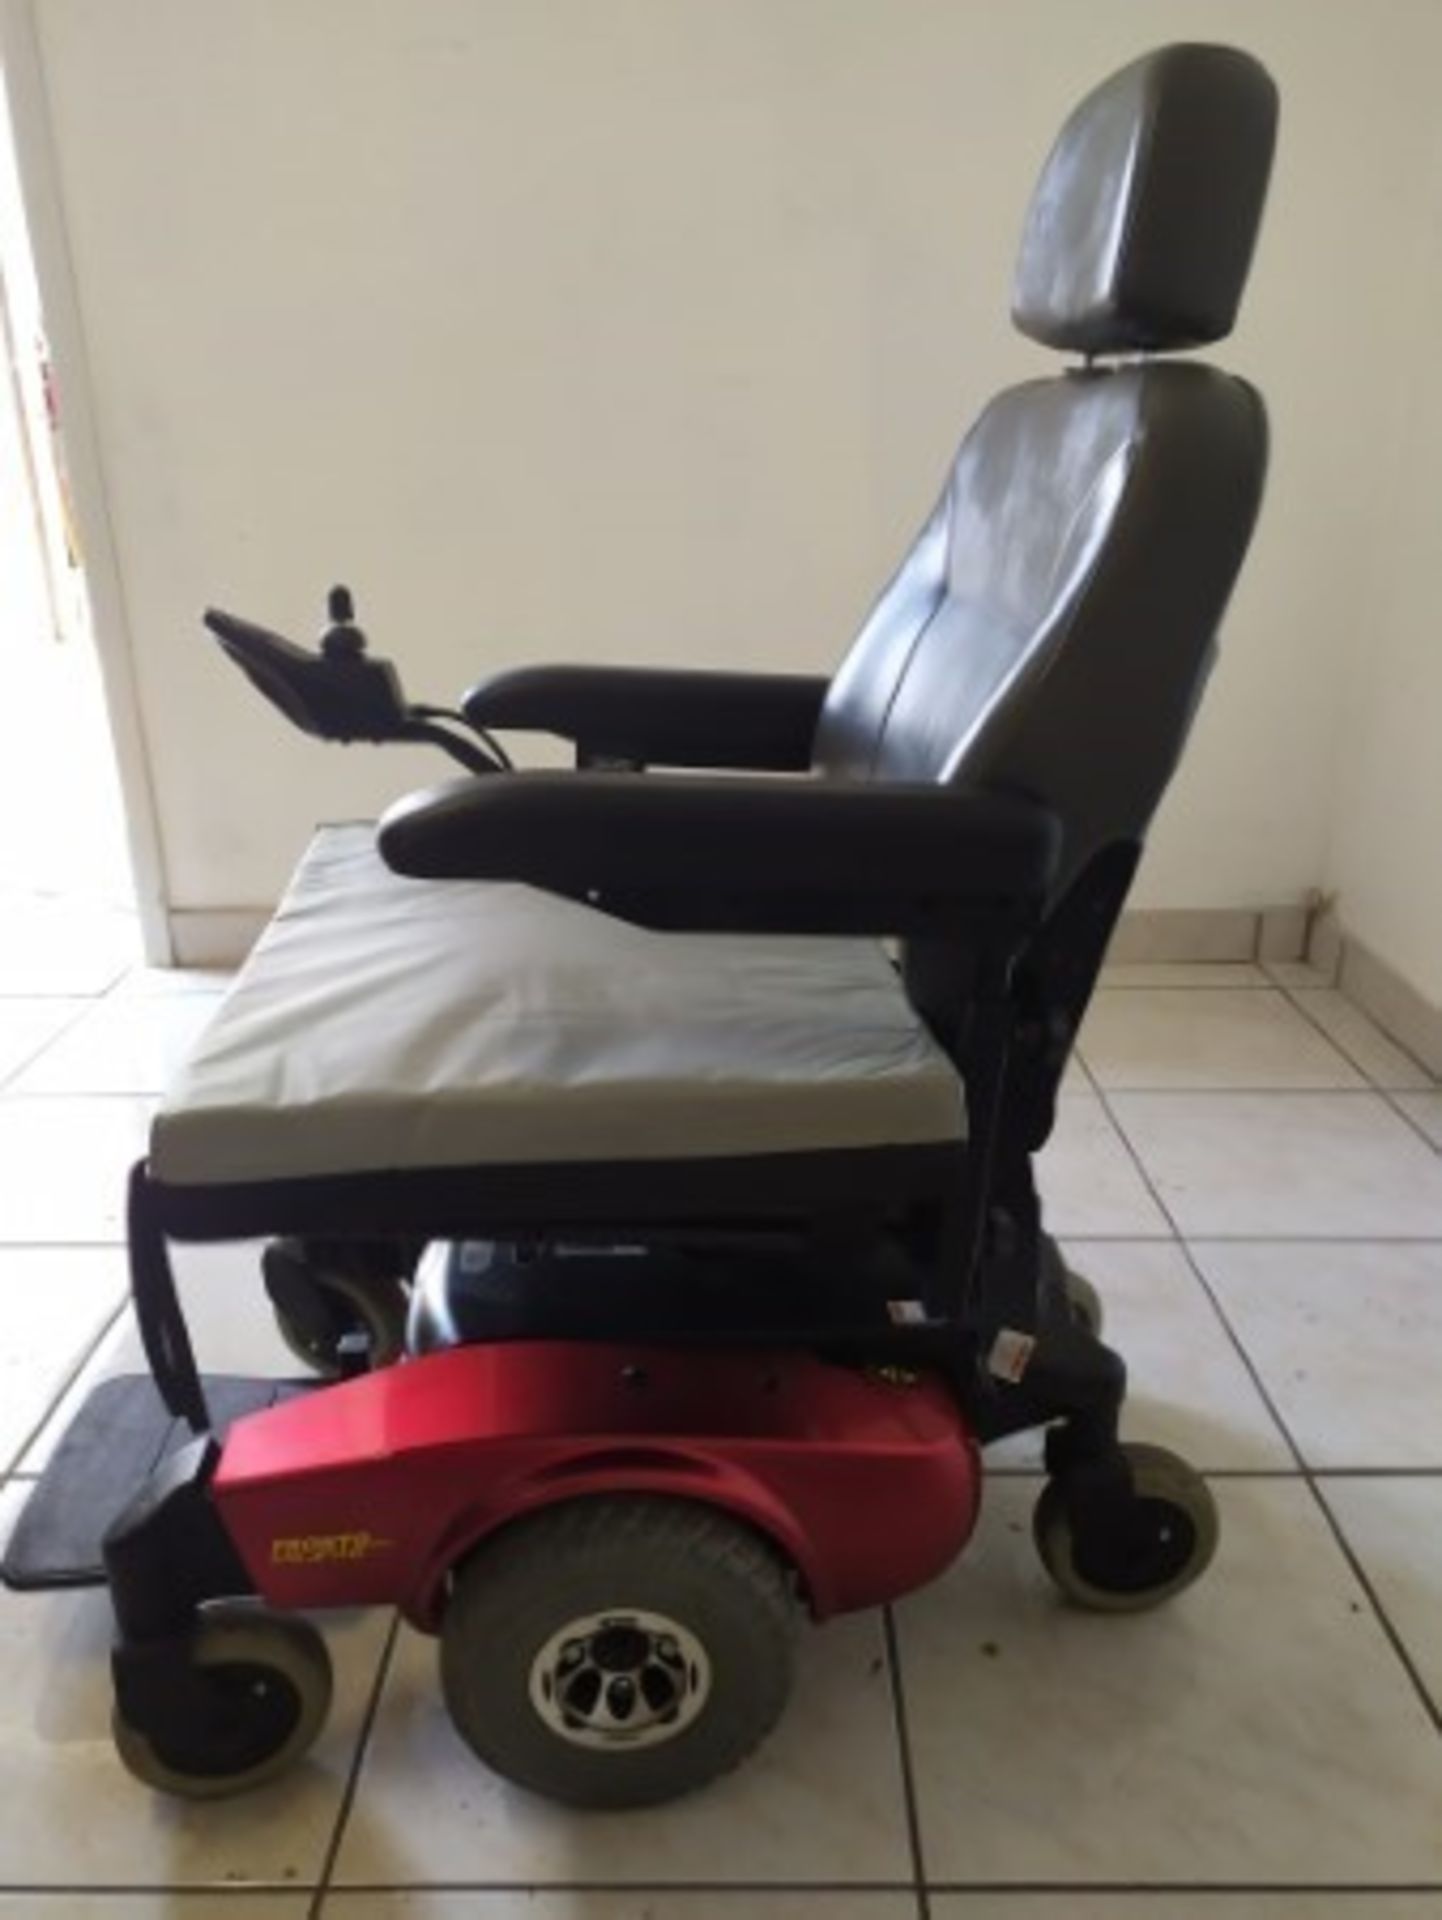 2007 INVACARE PRONTO M51PRB 6-WHEEL POWER CHAIR WITH BUILT-IN CHARGER - RED - 300LB CAPACITY - SERIA